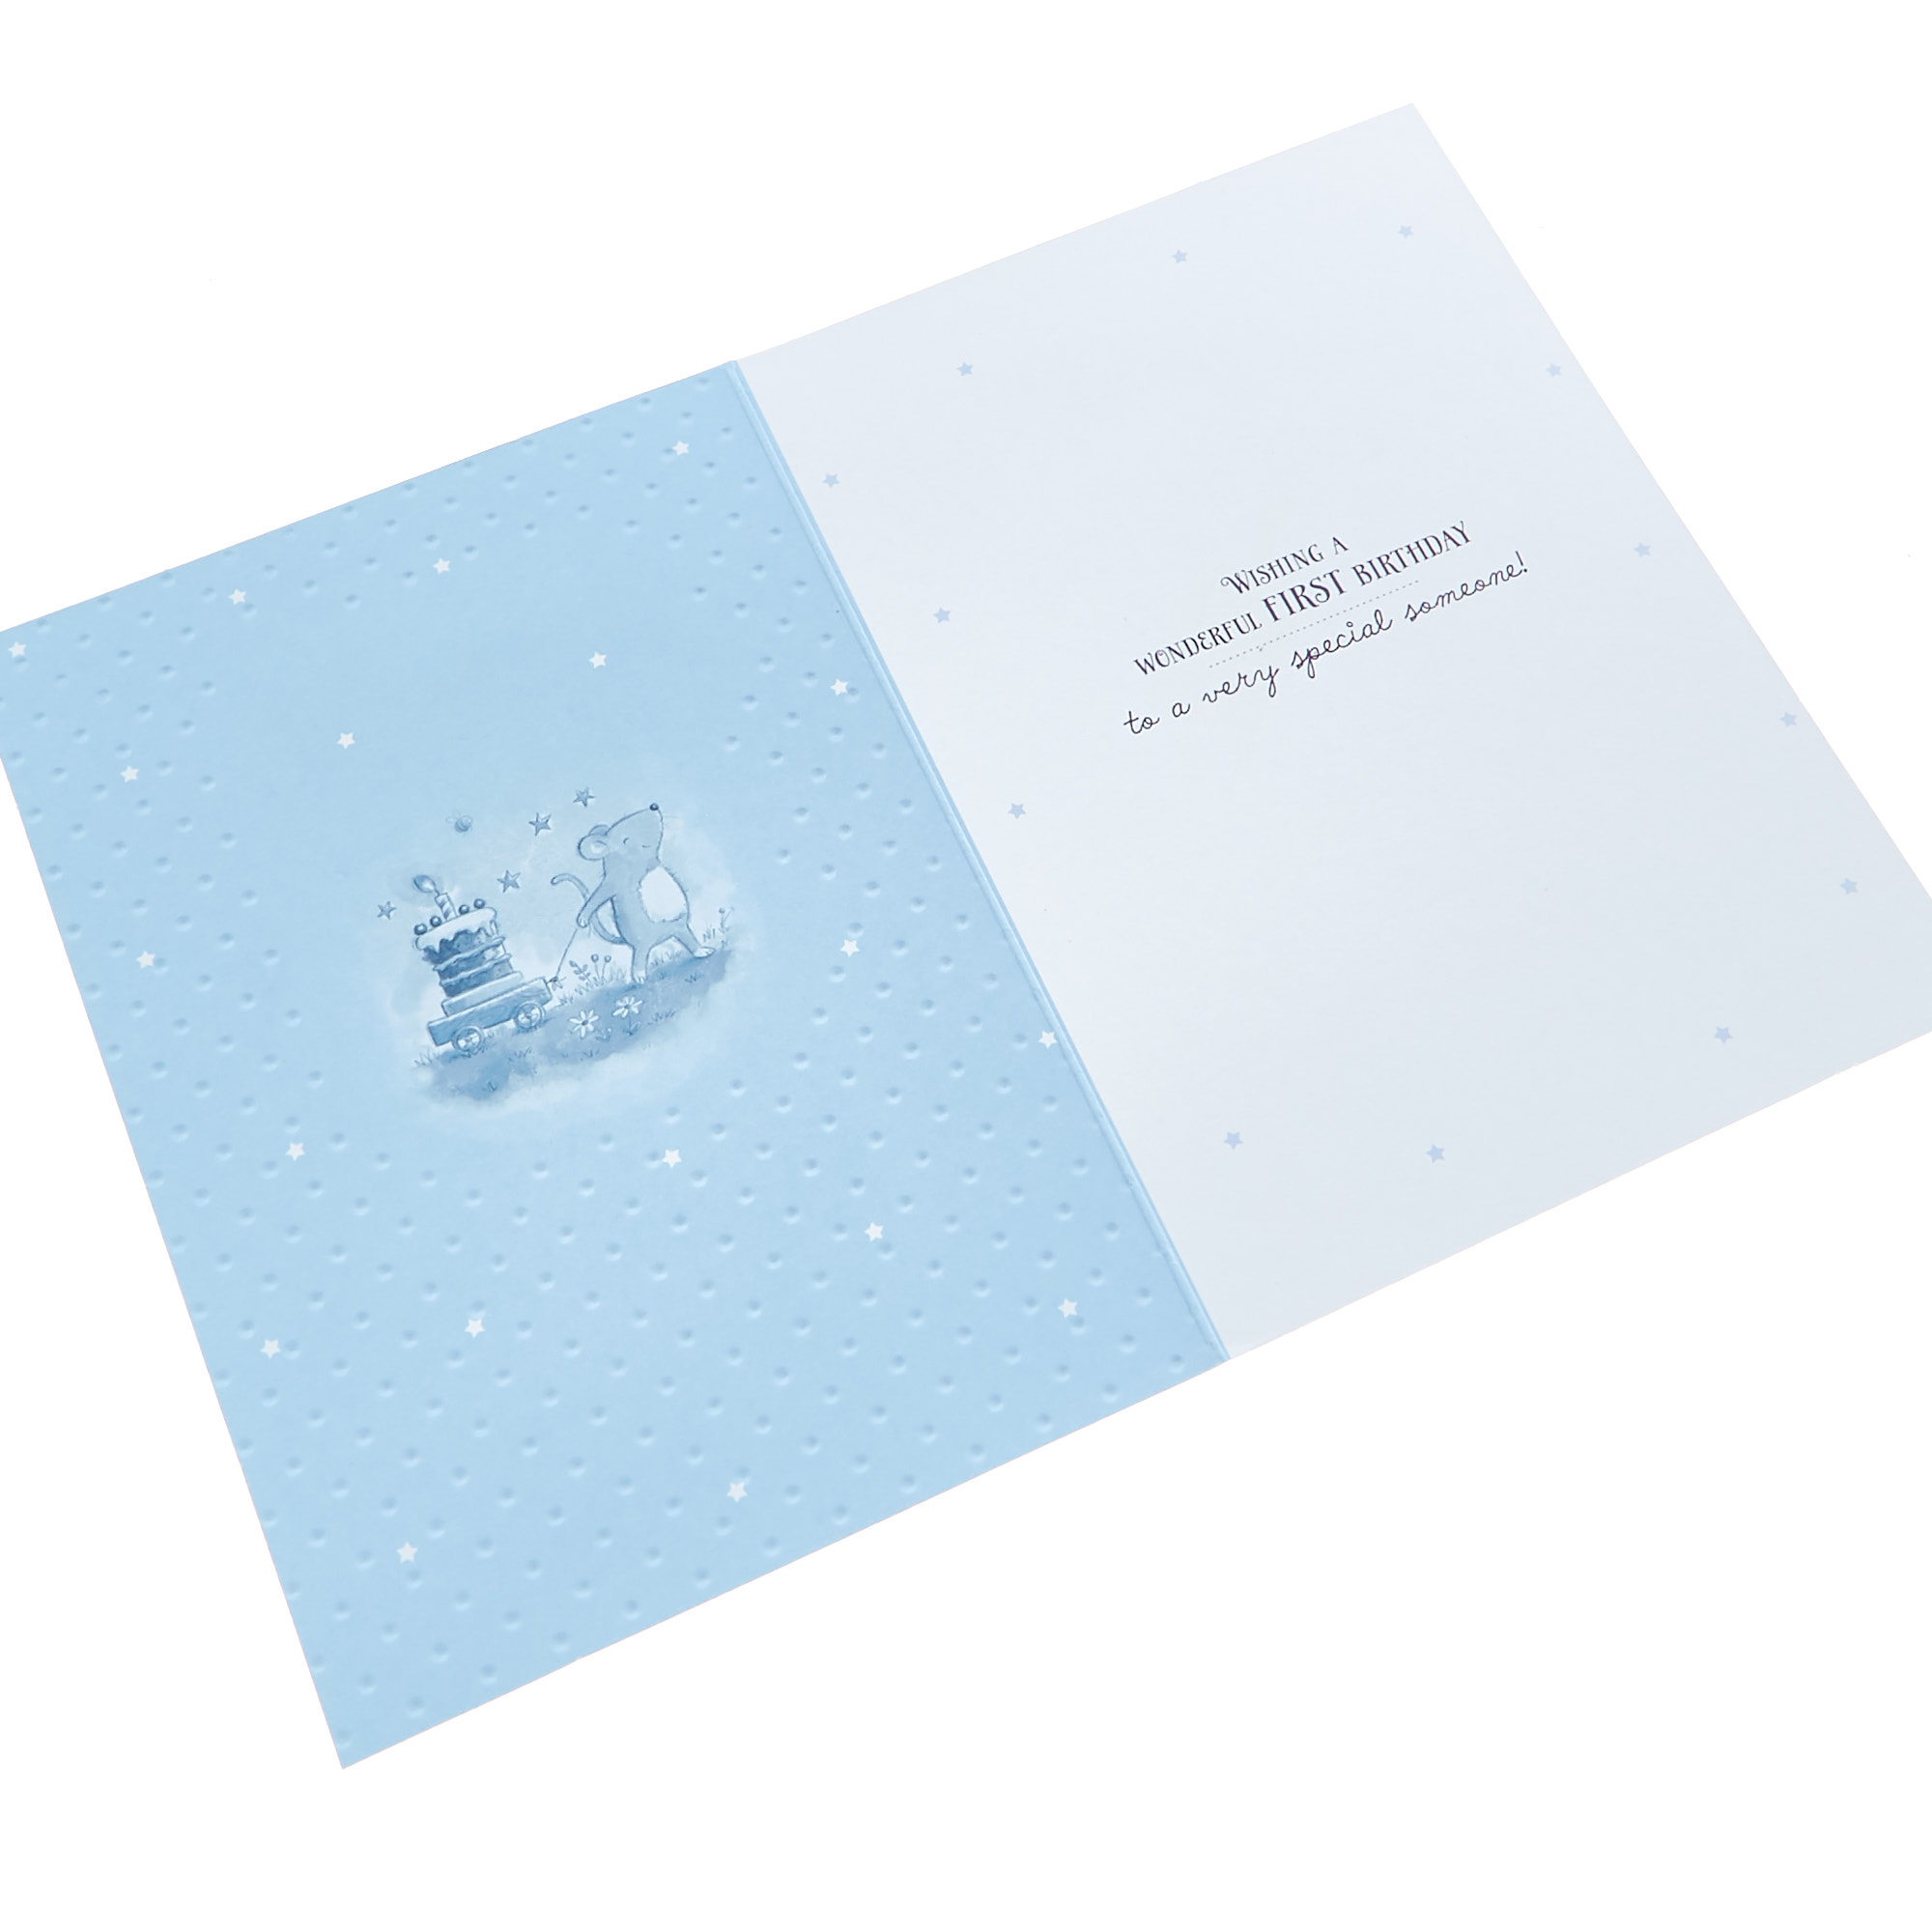 Personalised 60th Anniversary Card - Silver Heart